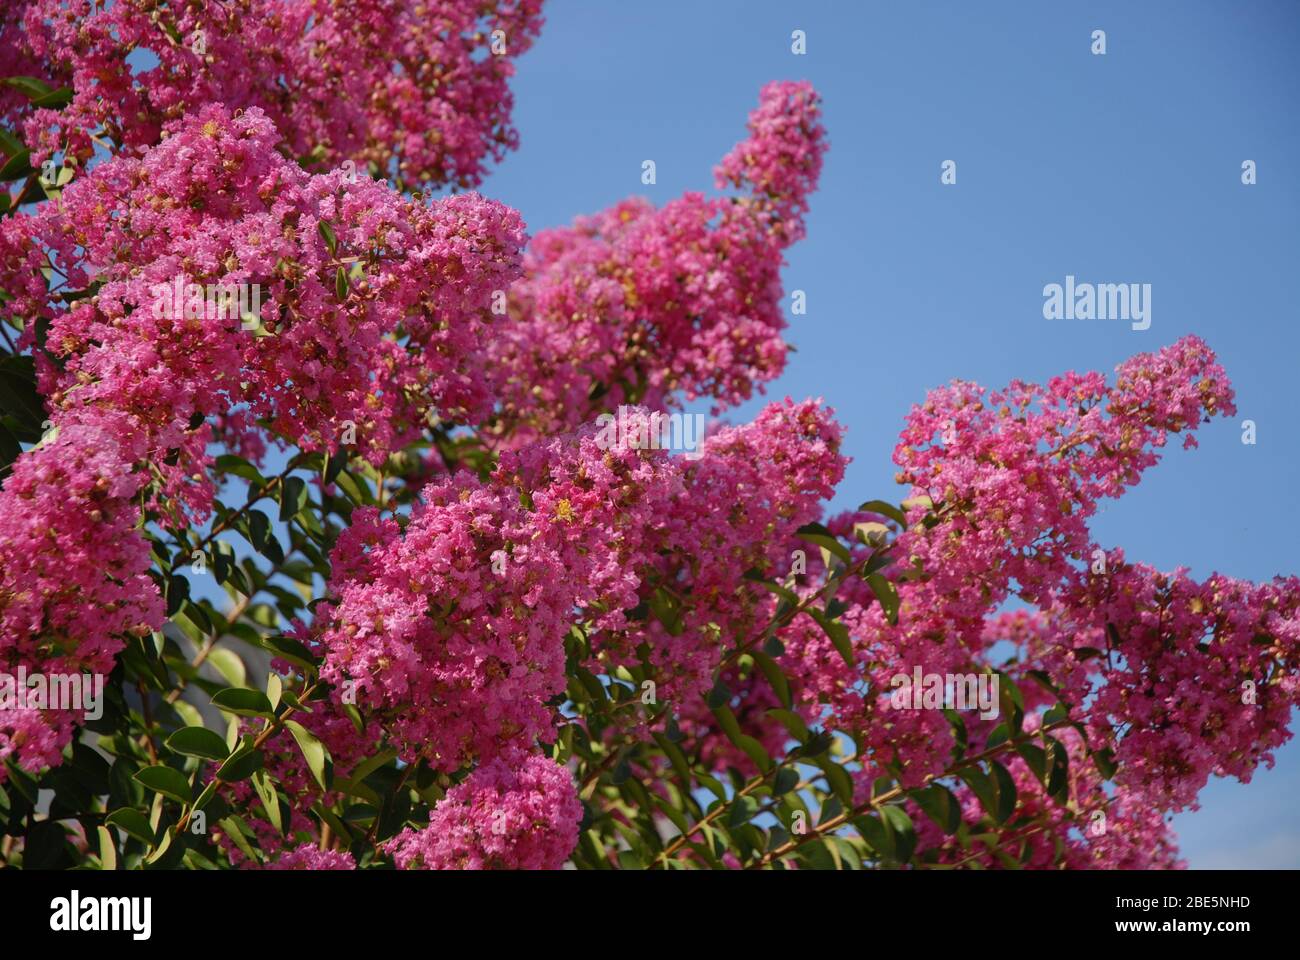 Pink flowers on a Crape myrtle, also known as Lagerstroemia indica Stock Photo